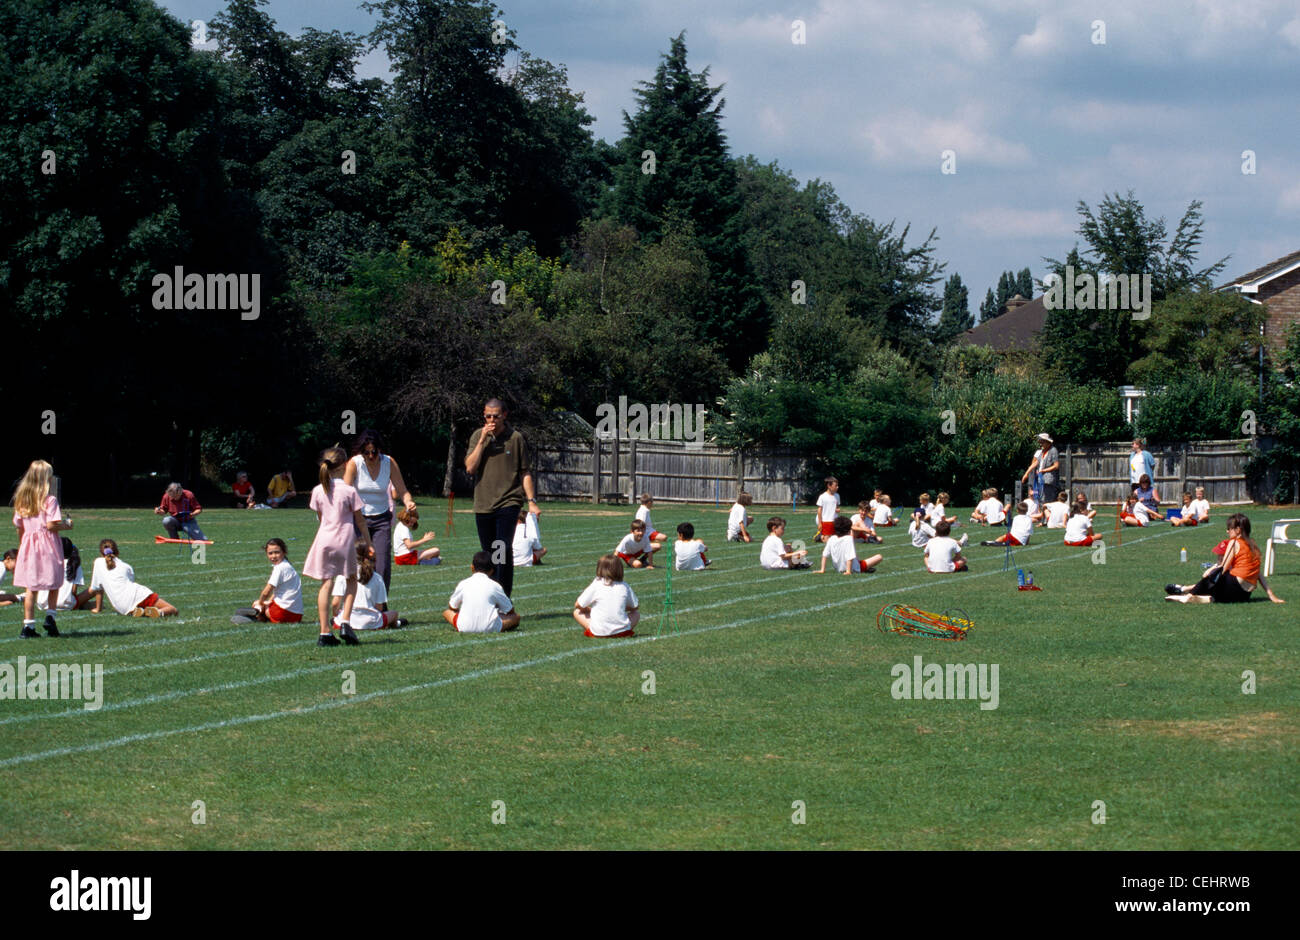 Primary School Sports Day Children Sitting On Grass With Teacher Holding A Whistle Stock Photo